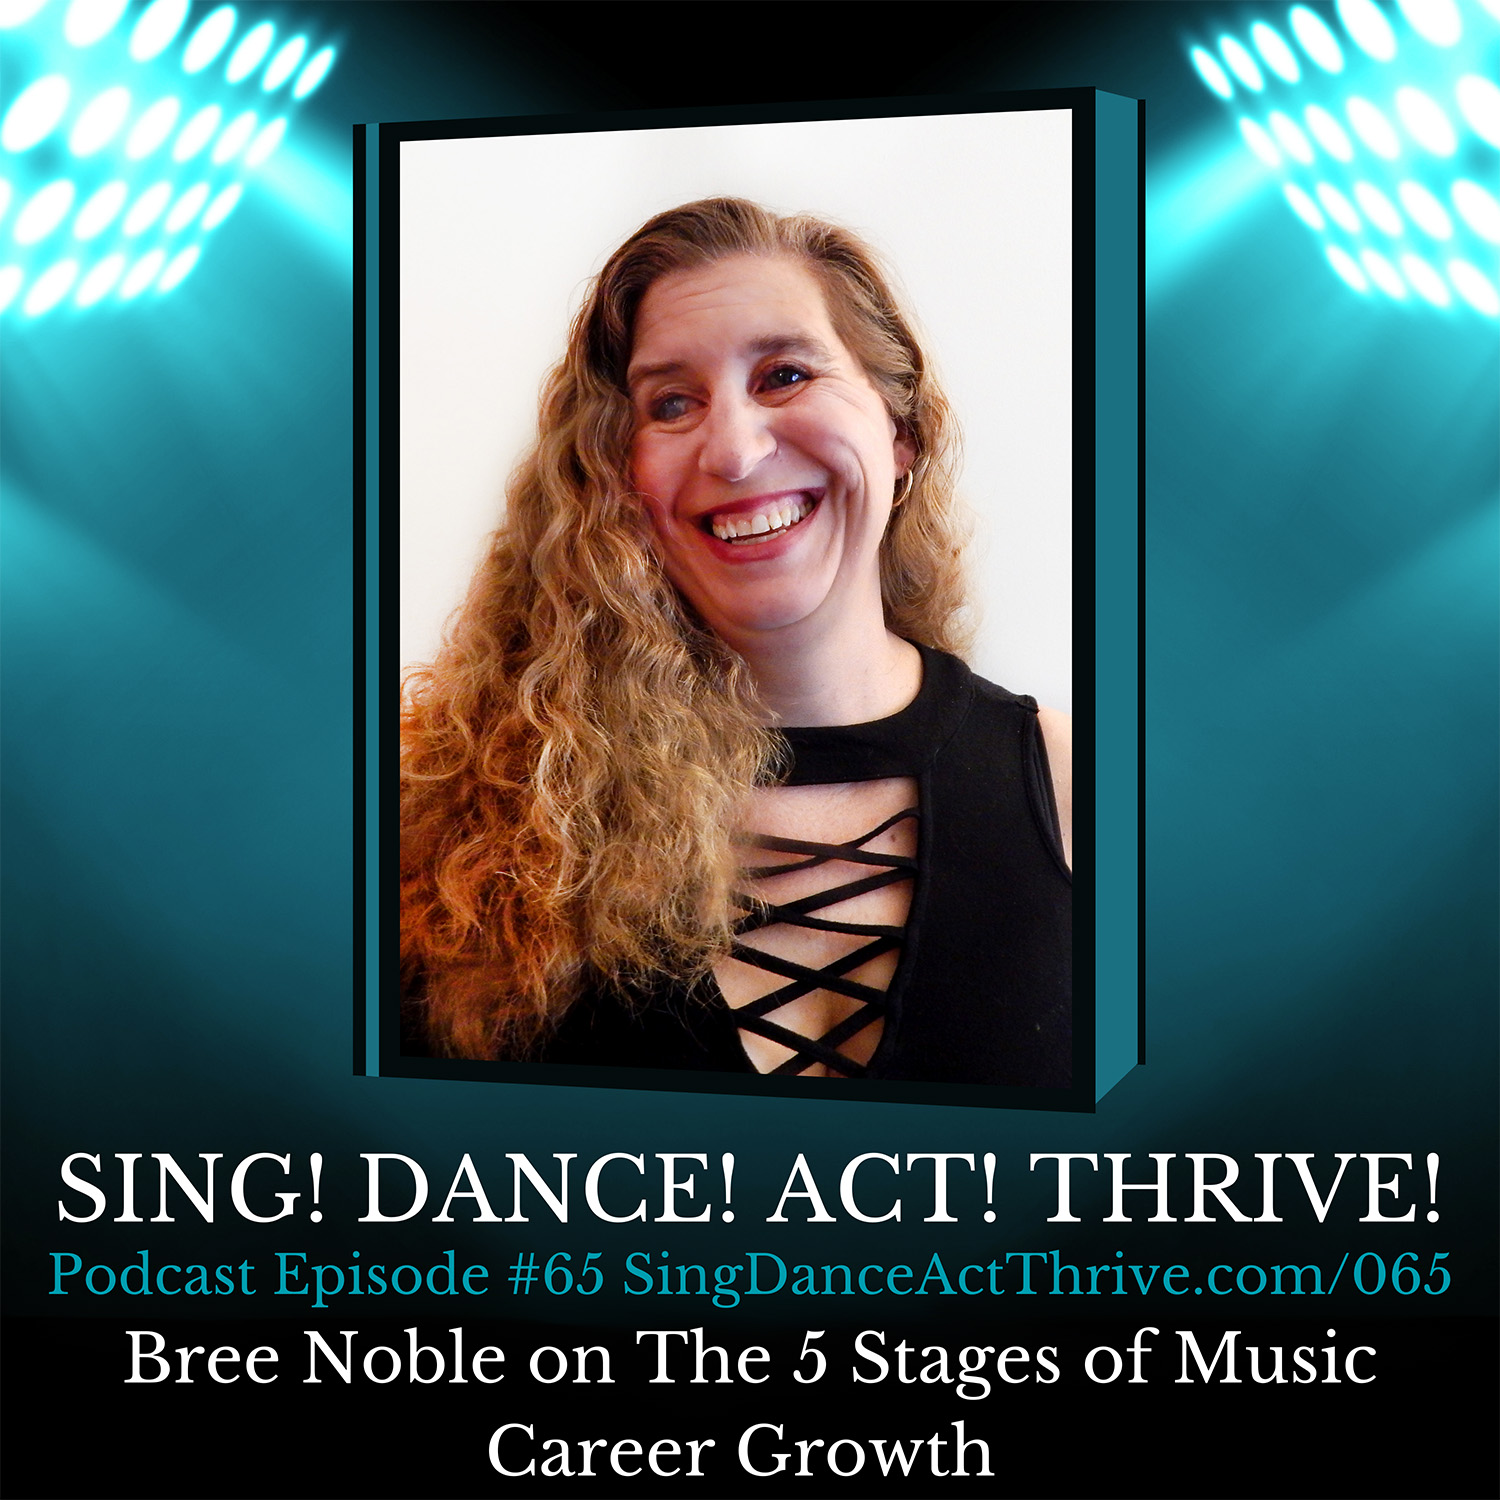 Bree-Noble-5-Stages-of-Music-Career-Growth-on-Sing-Dance-Act-Thrive-Podcast